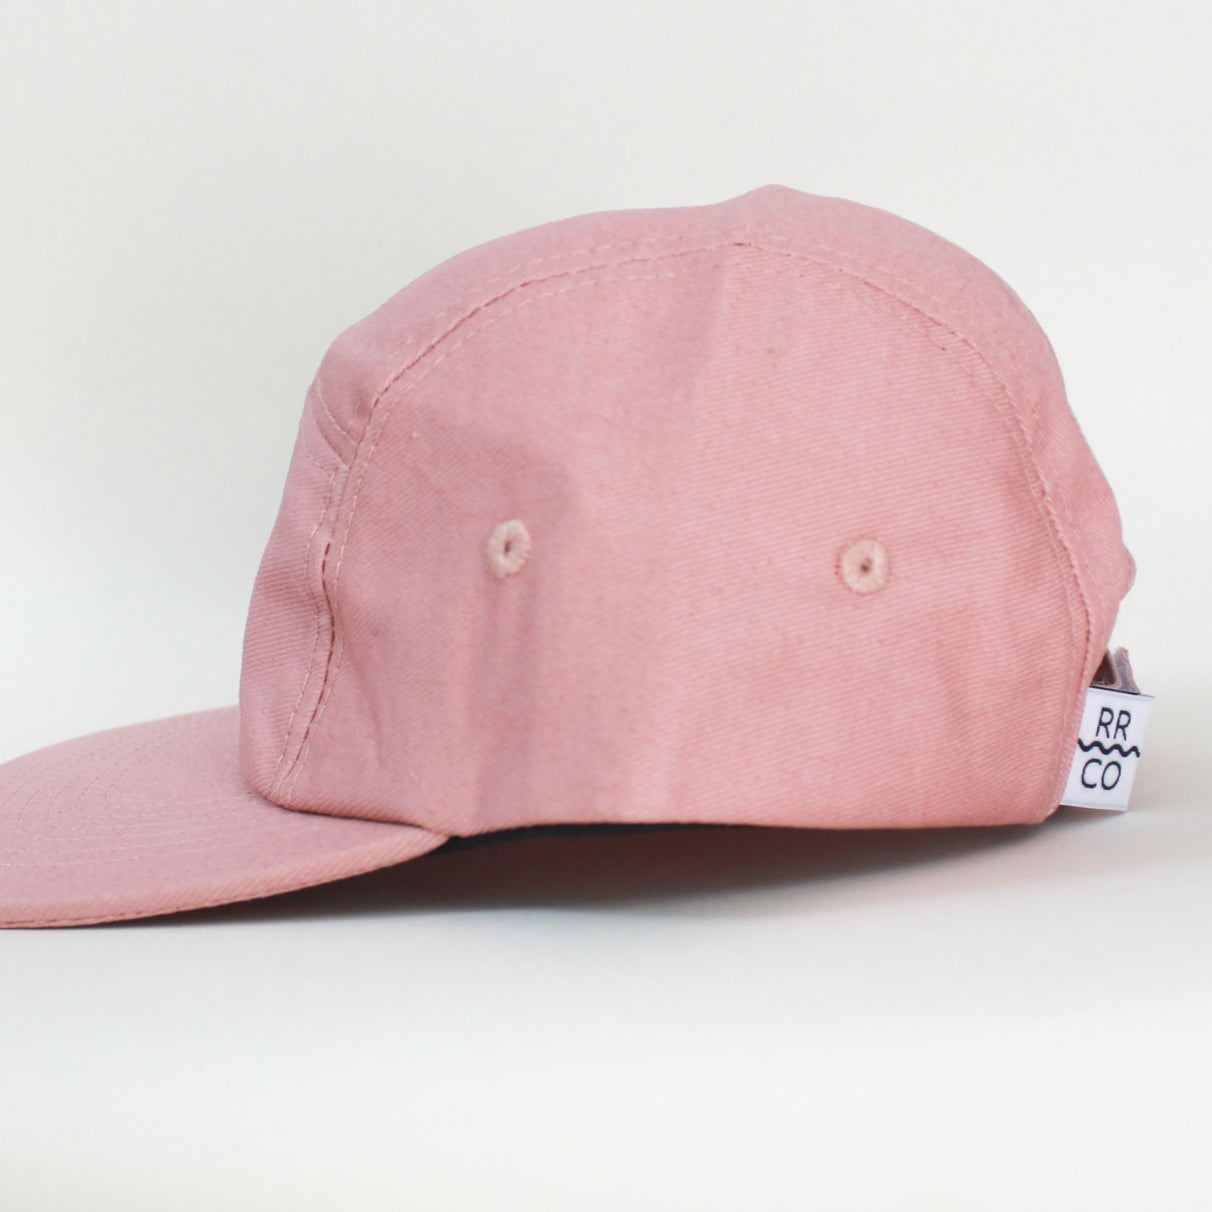 five-panel hat in blush